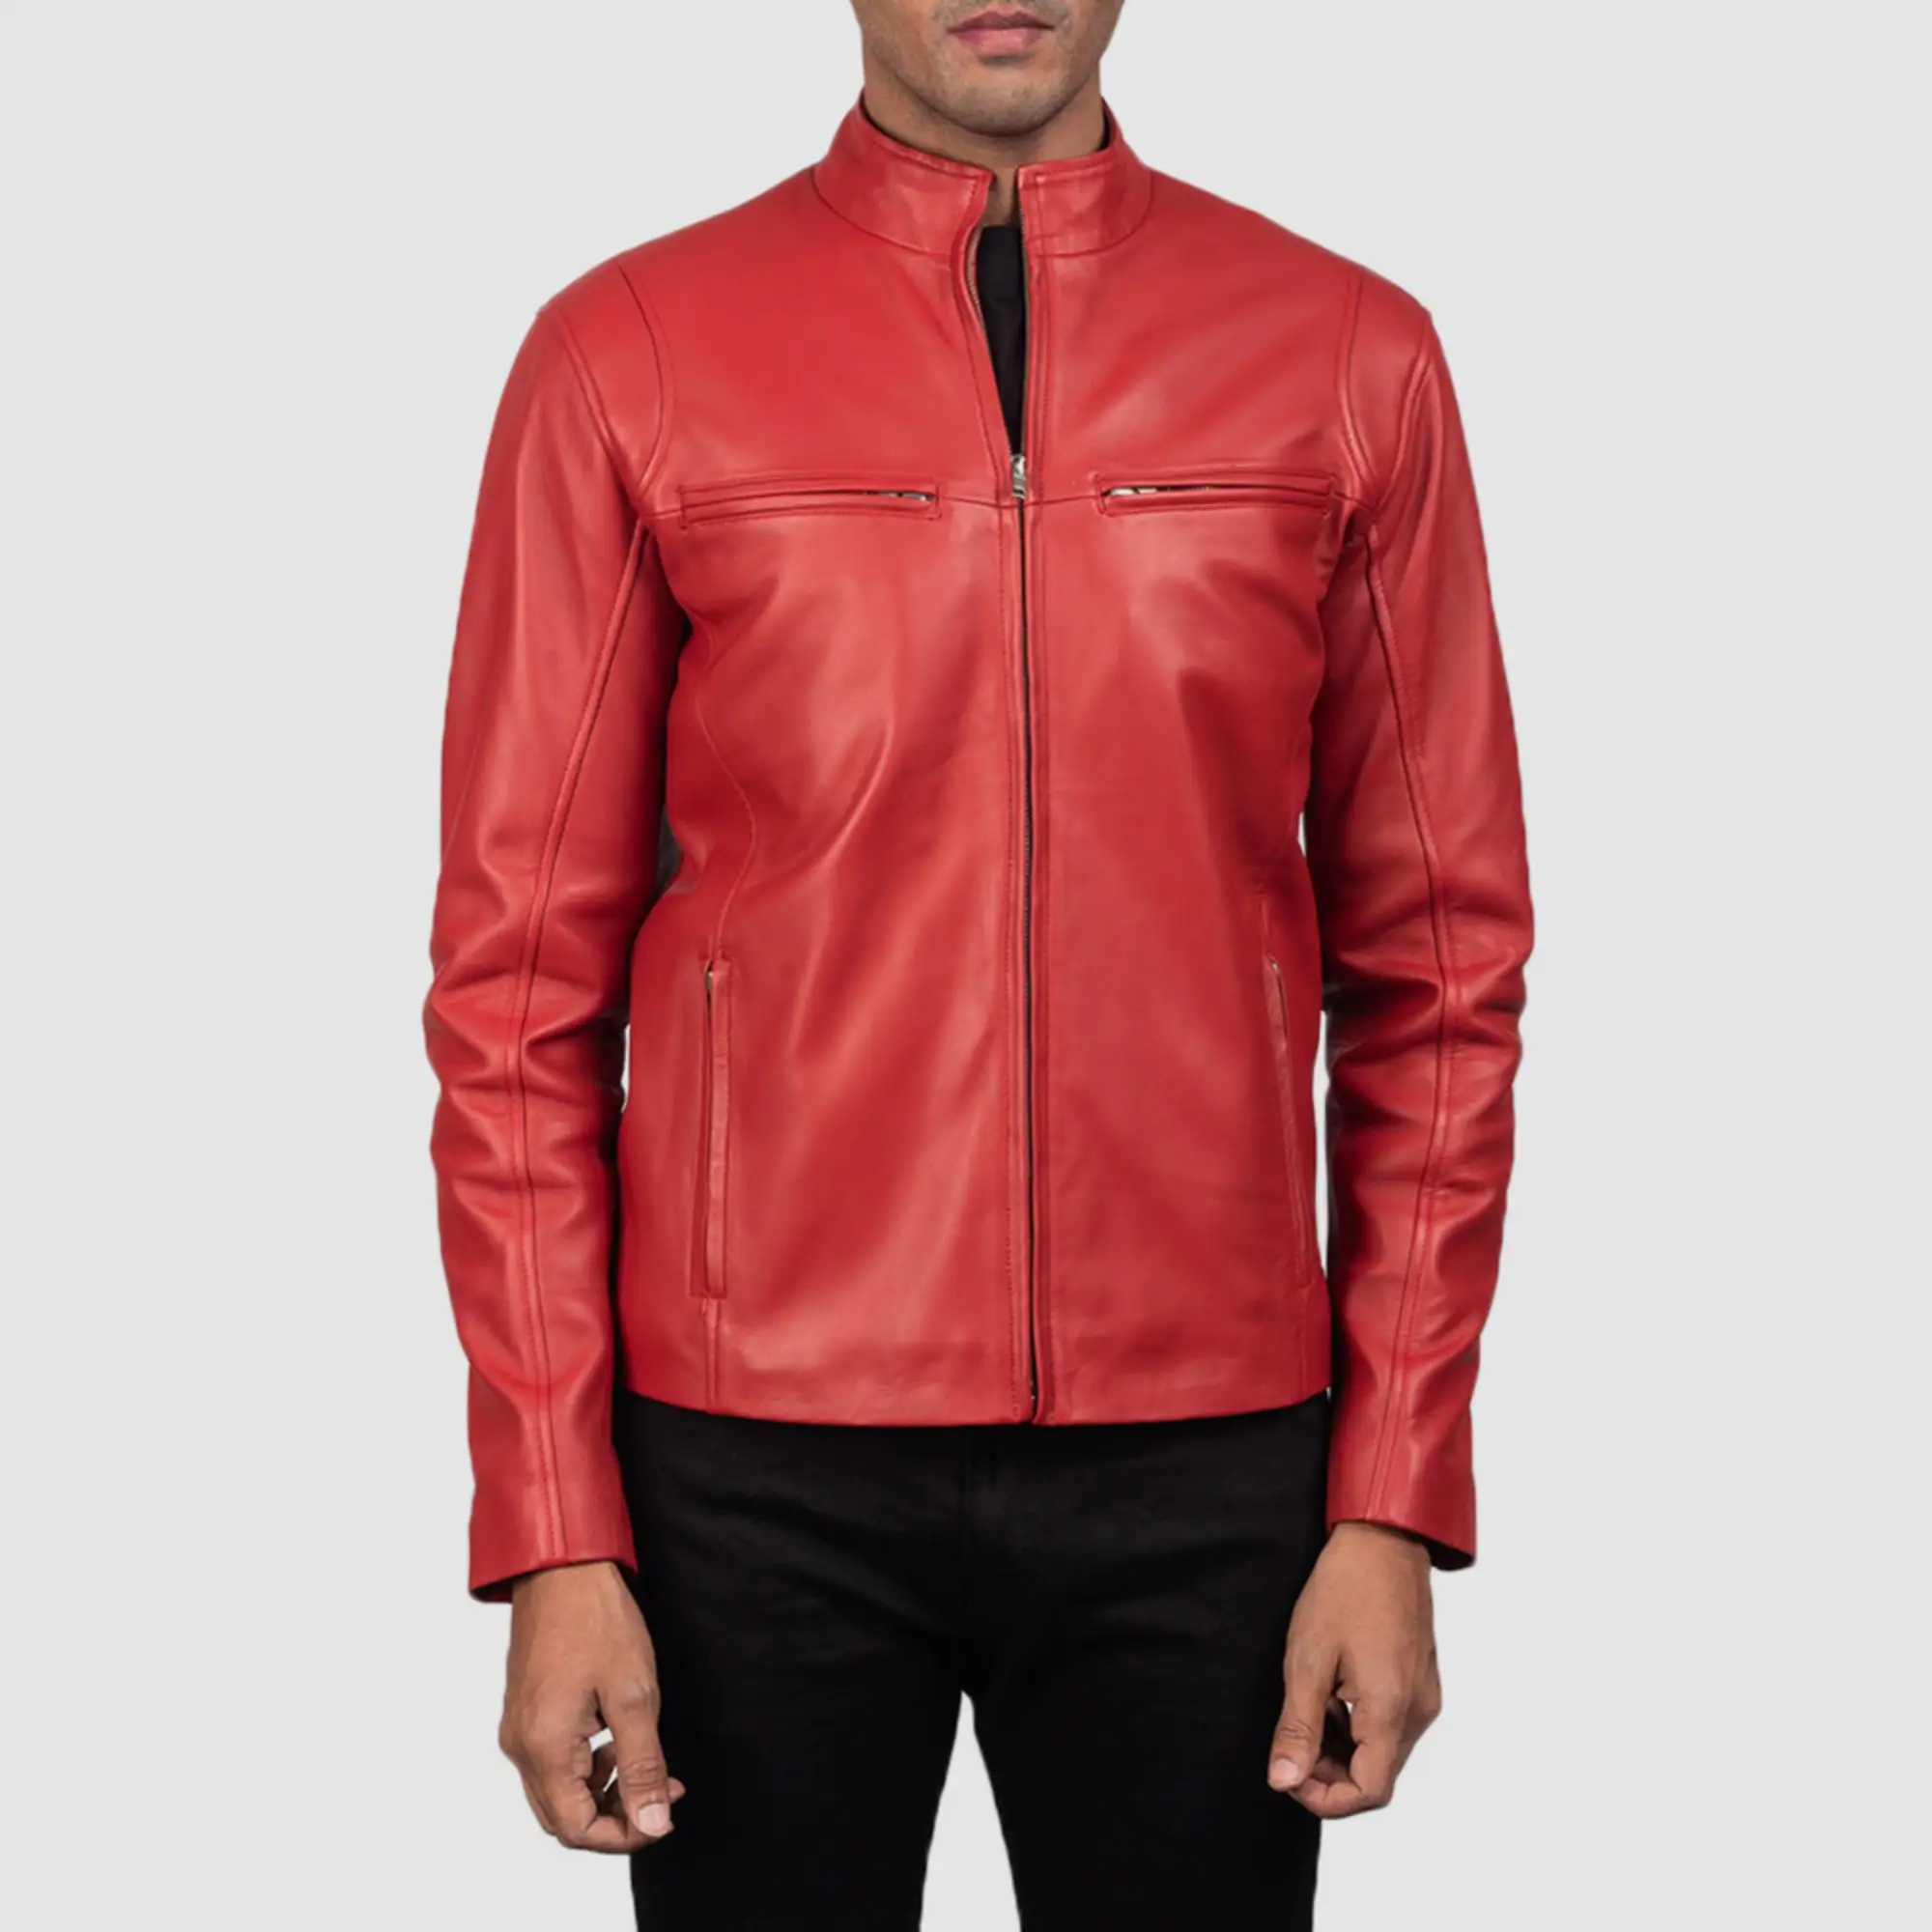 Real Leather Sheepskin Aniline Zipper Iconic Red Men Biker Jacket with Quilted Viscose Lining and Inside Outside Pockets